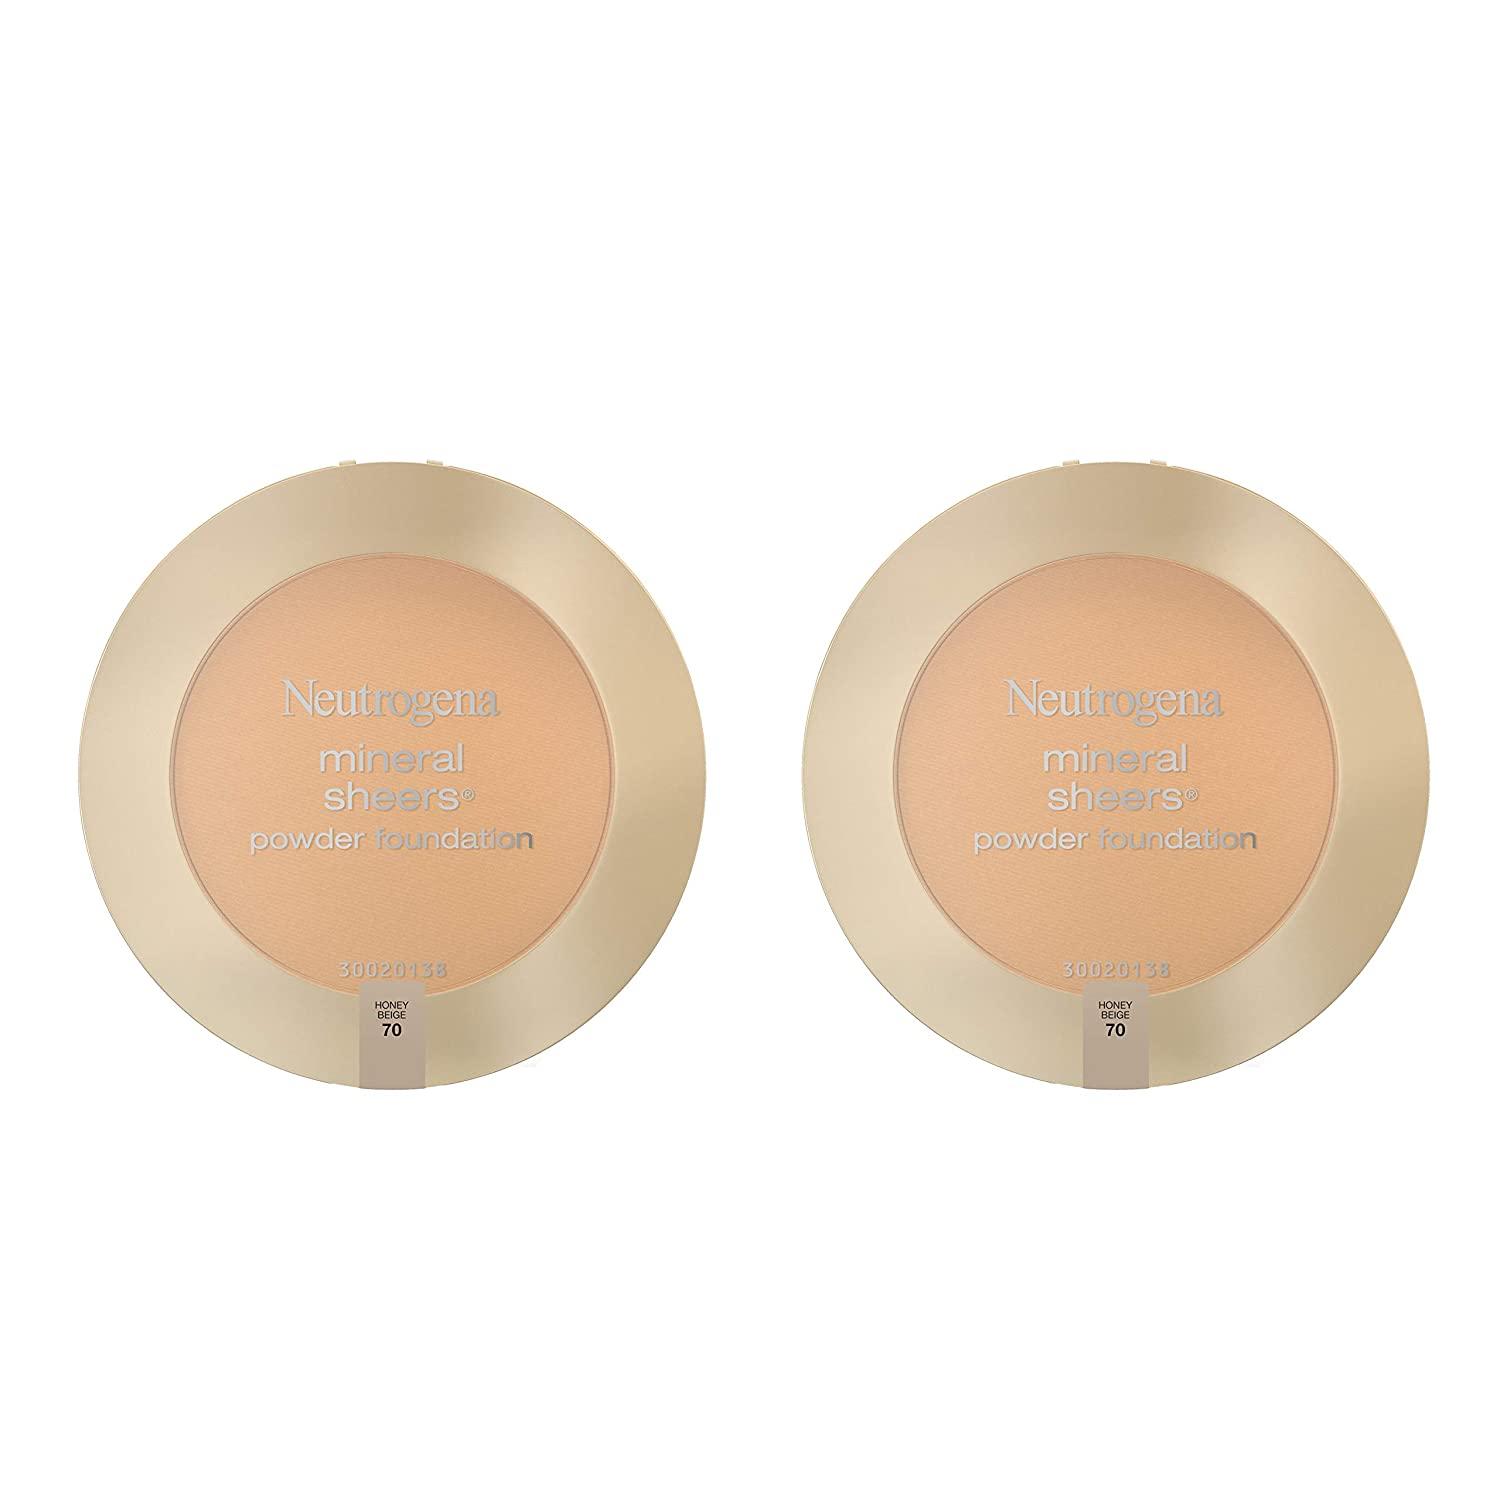 2 Neutrogena Mineral Sheers Compact Powder Foundations for $4.35 Shipped